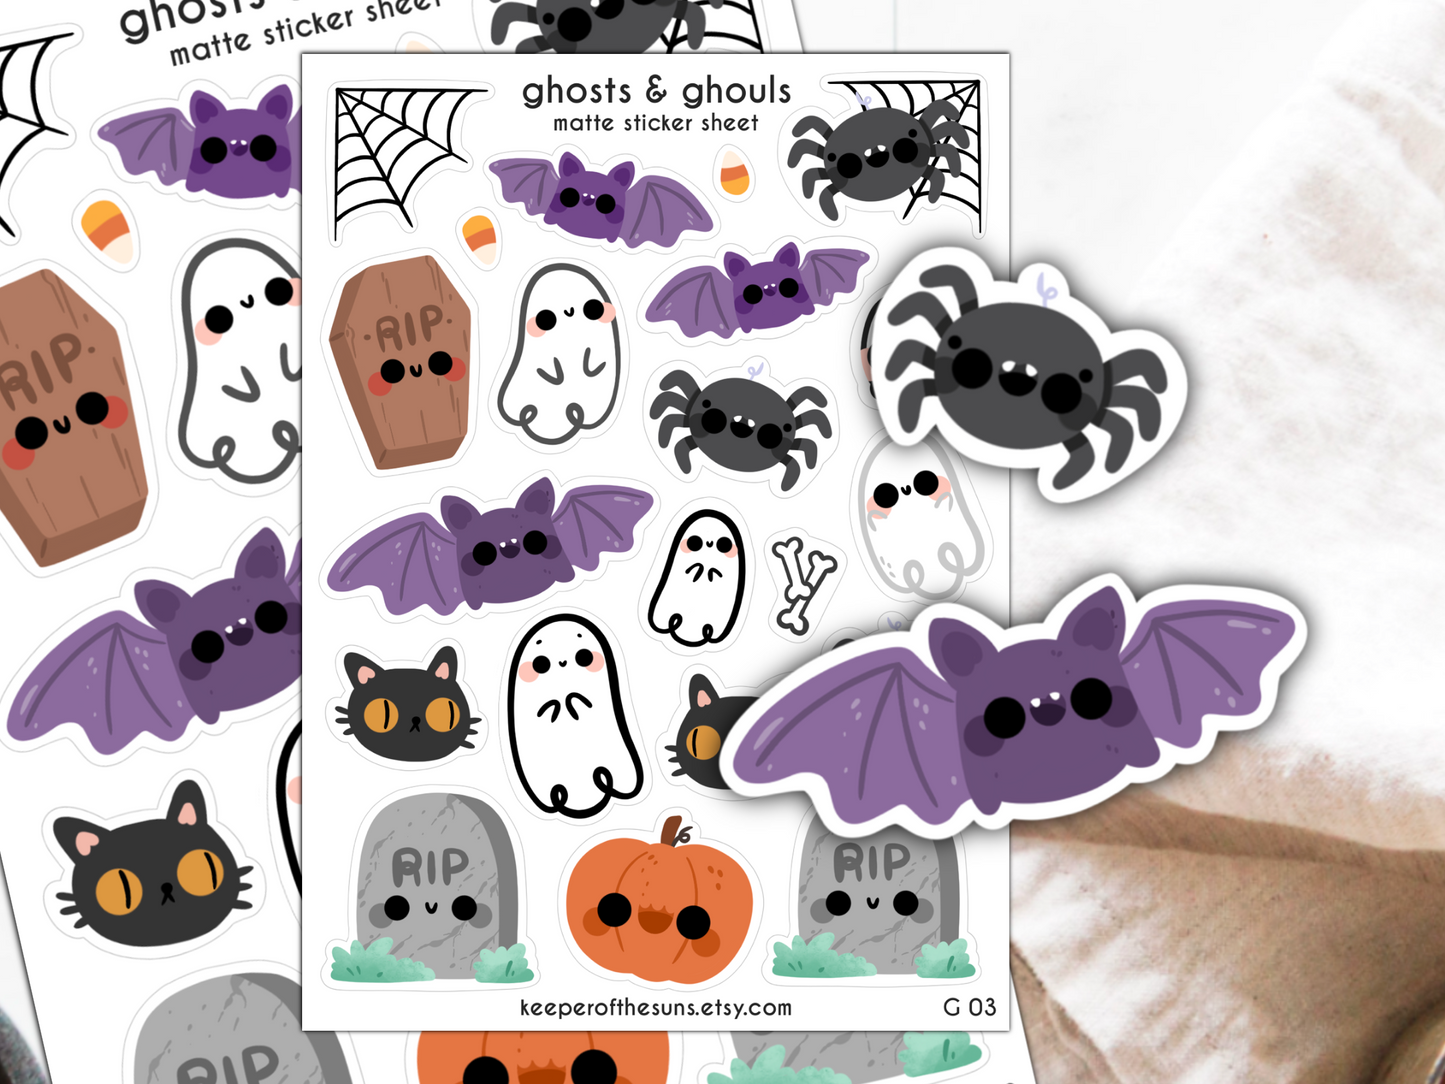 Ghosts & Ghouls Sticker Sheet | Small Planner Stickers